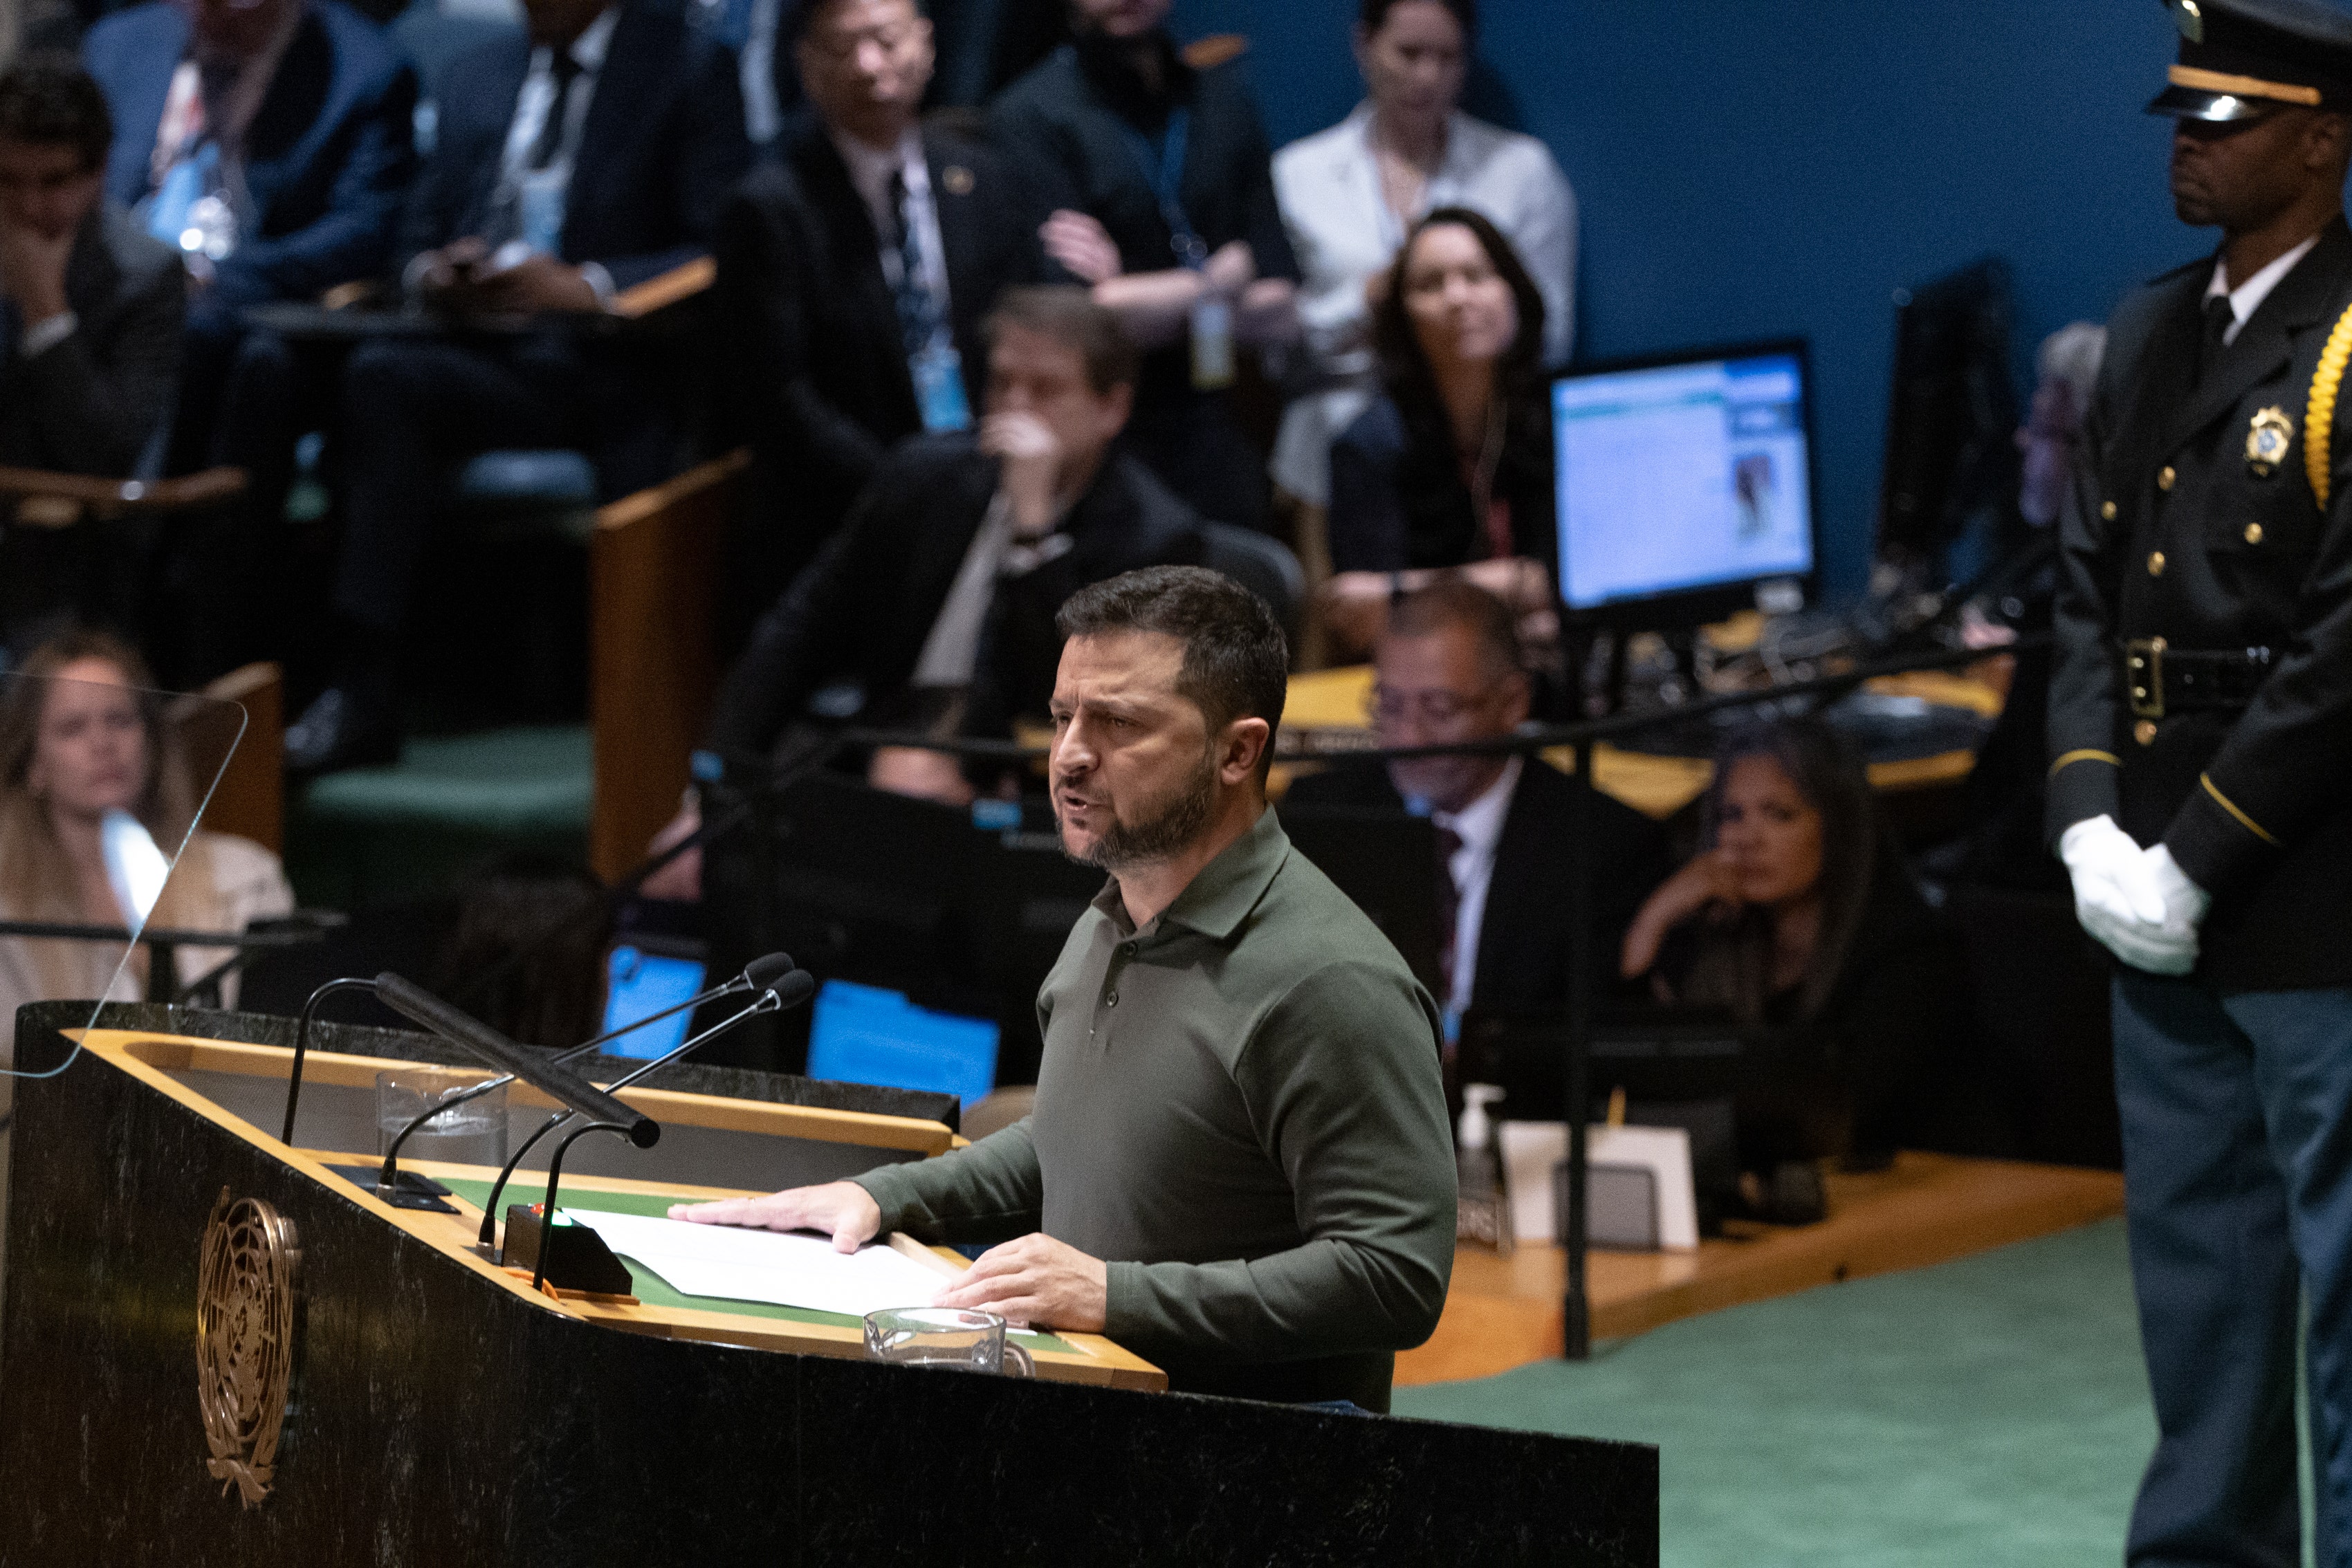 Zelenskyy accuses Russia of food supply blackmail, carrying out 'genocide' against Ukraine during UN speech